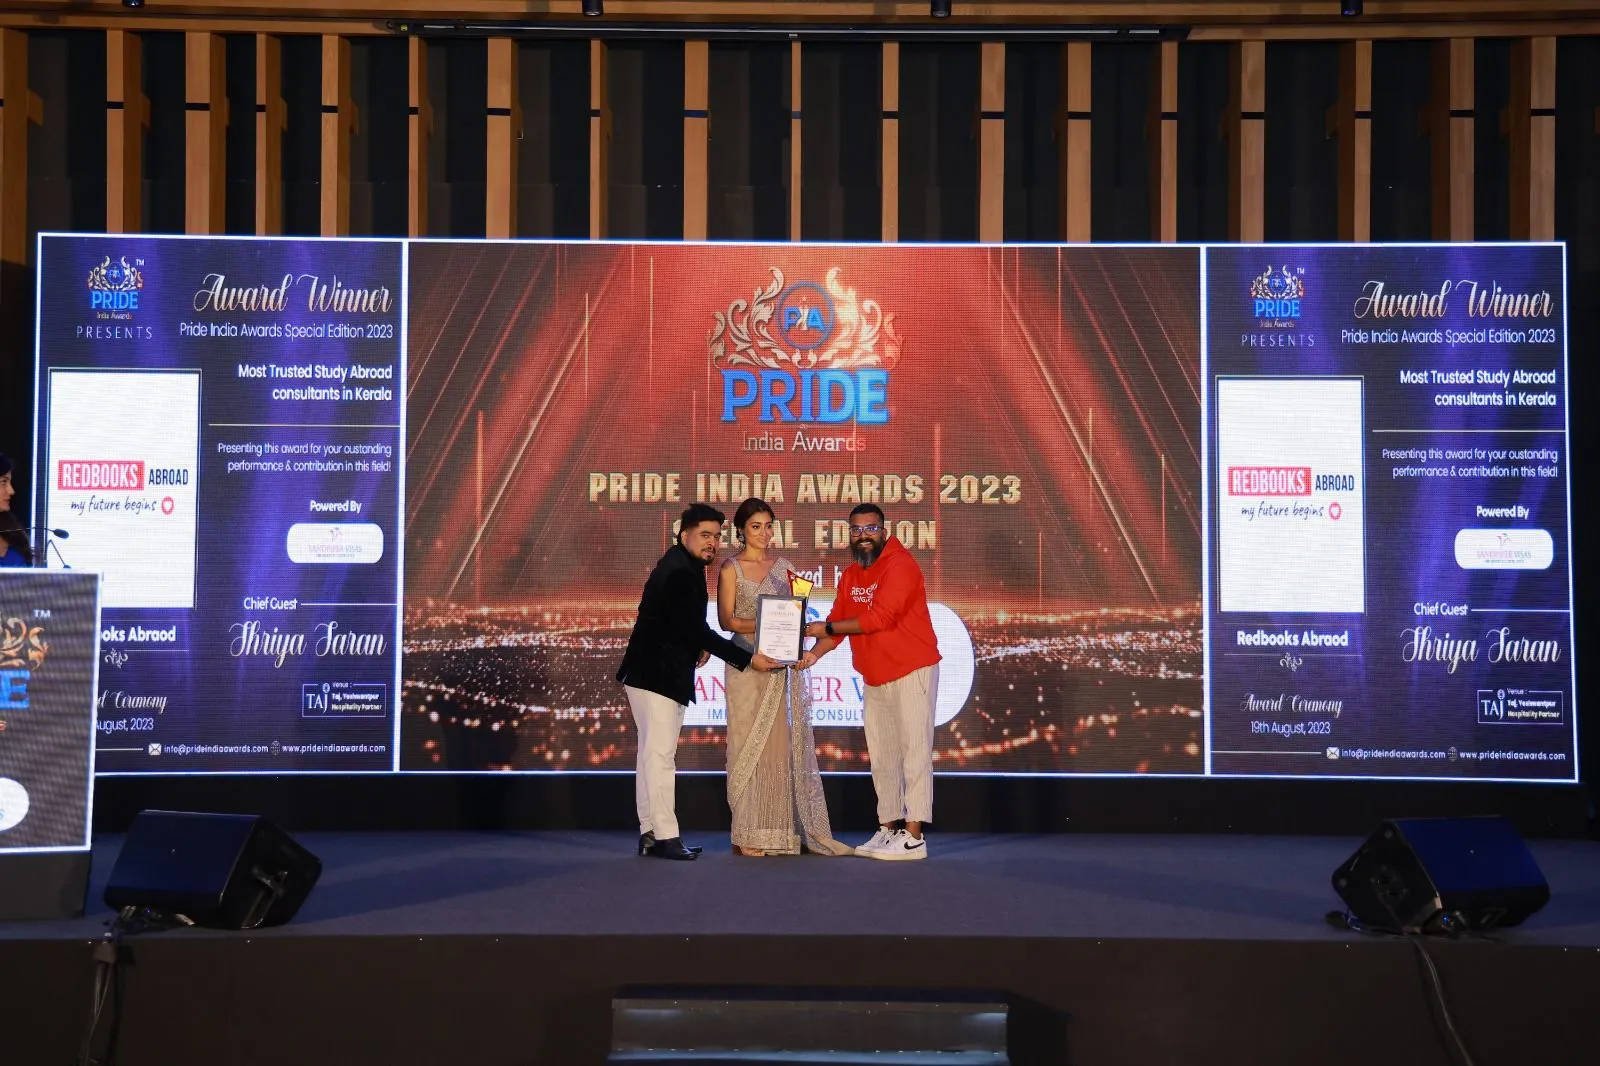 Read more about the article We are honored with the title “Most Trusted Study Abroad Consultants in Kerala for 2023” issued by Pride India Awards.